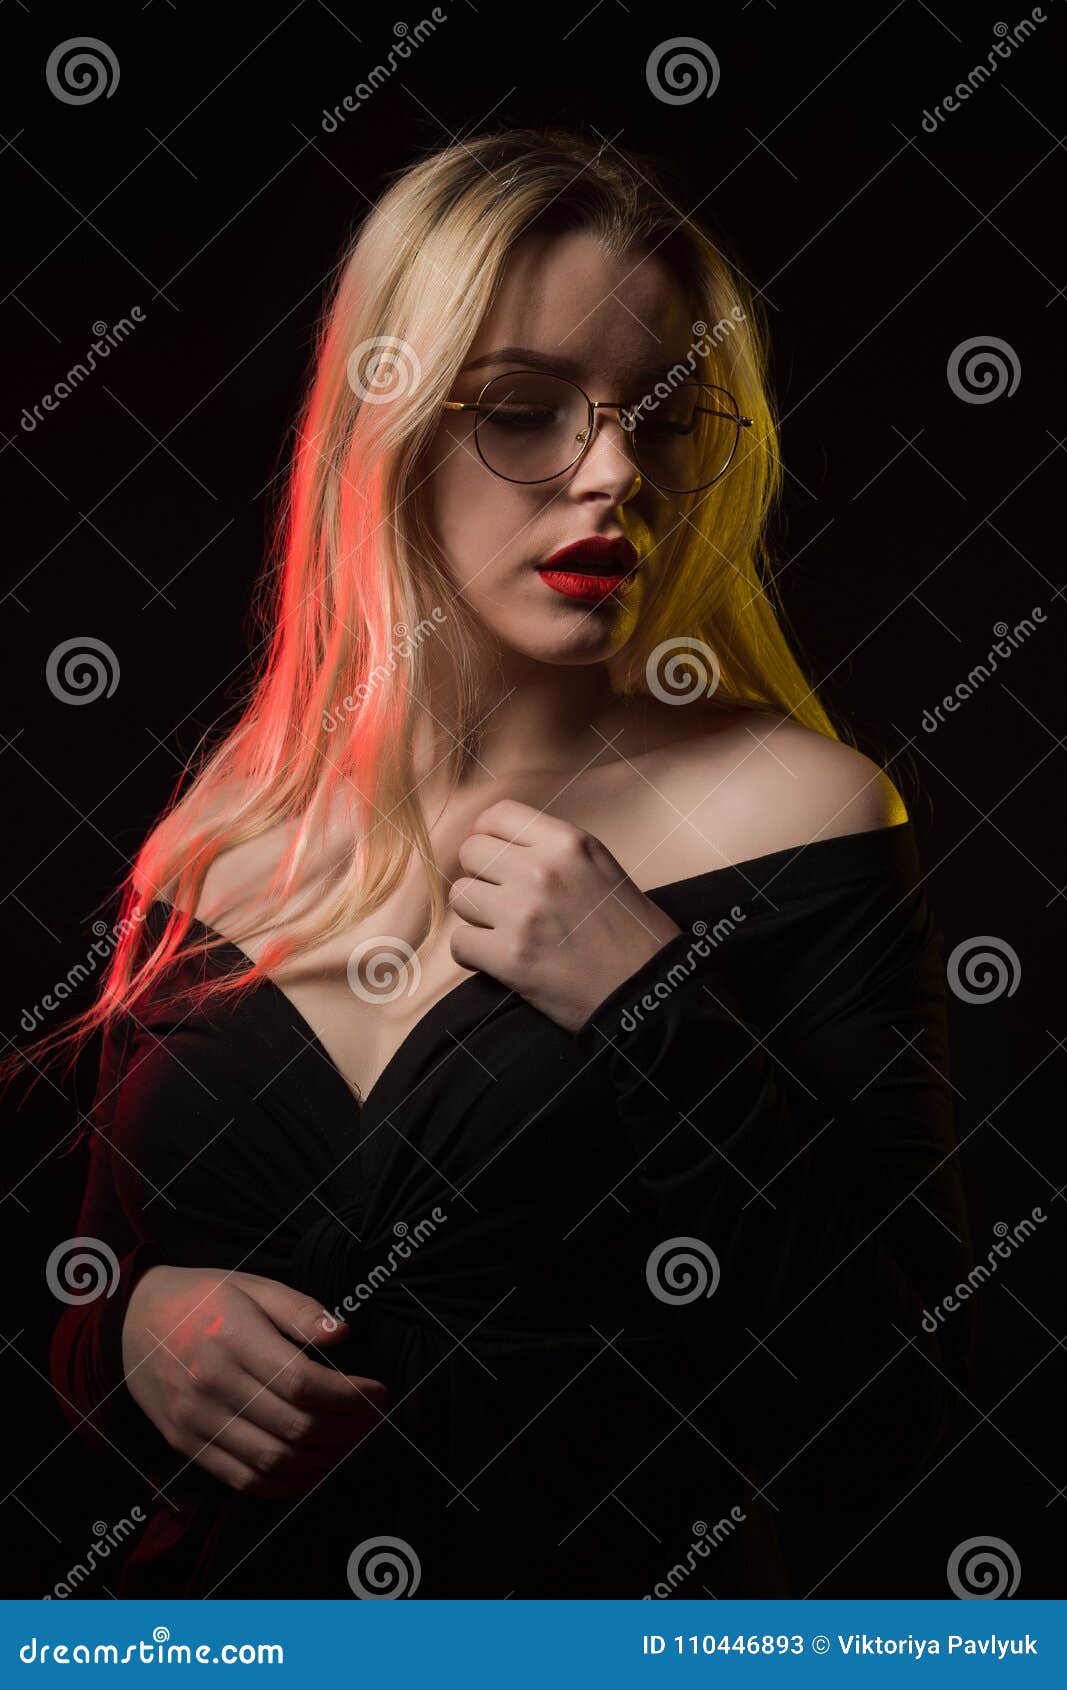 Naked girls blond glasses Beautiful Blonde Woman In Glasses Wearing Blouse With Naked Shoulders Posing With Red And Yellow Light Stock Image Image Of Person Brunette 110446893